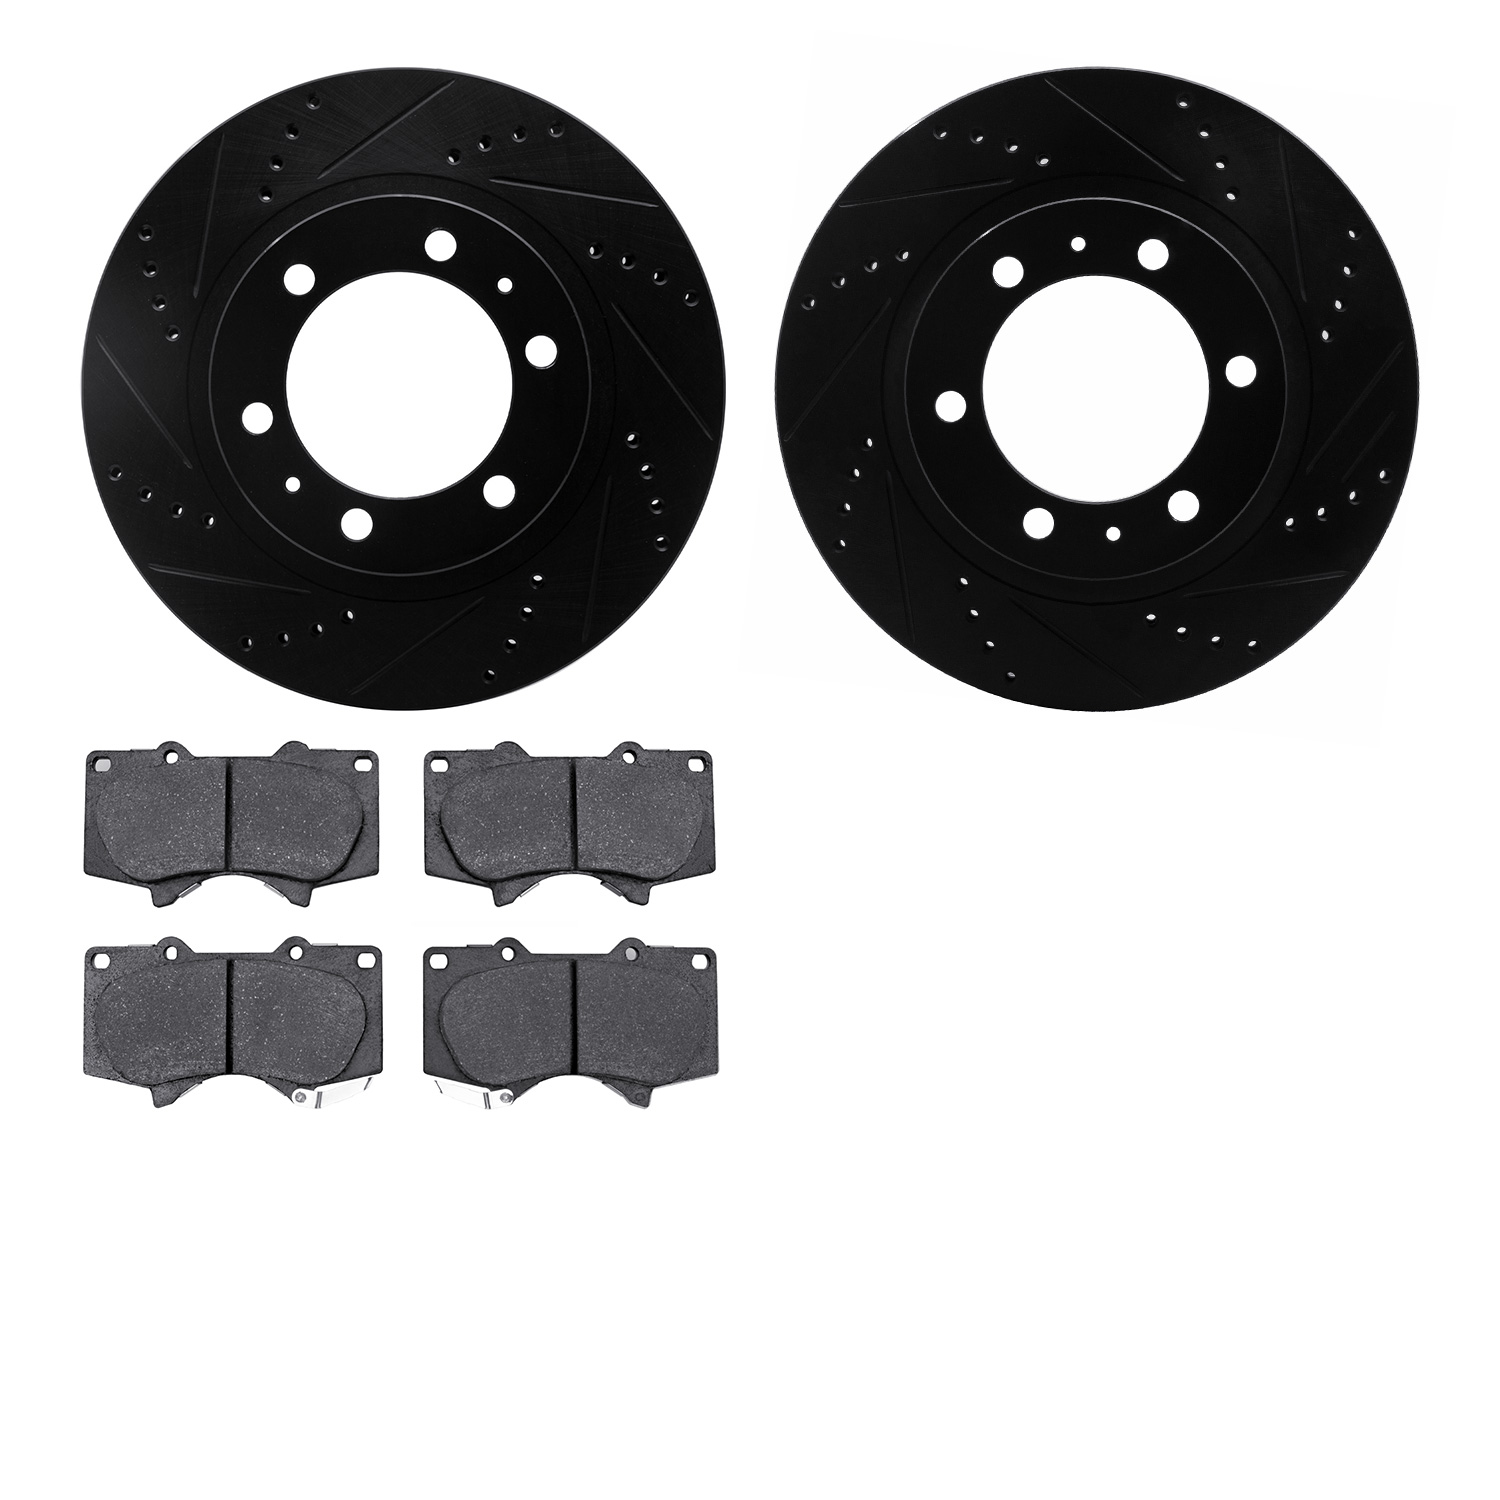 8302-76147 Drilled/Slotted Brake Rotors with 3000-Series Ceramic Brake Pads Kit [Black], Fits Select Lexus/Toyota/Scion, Positio